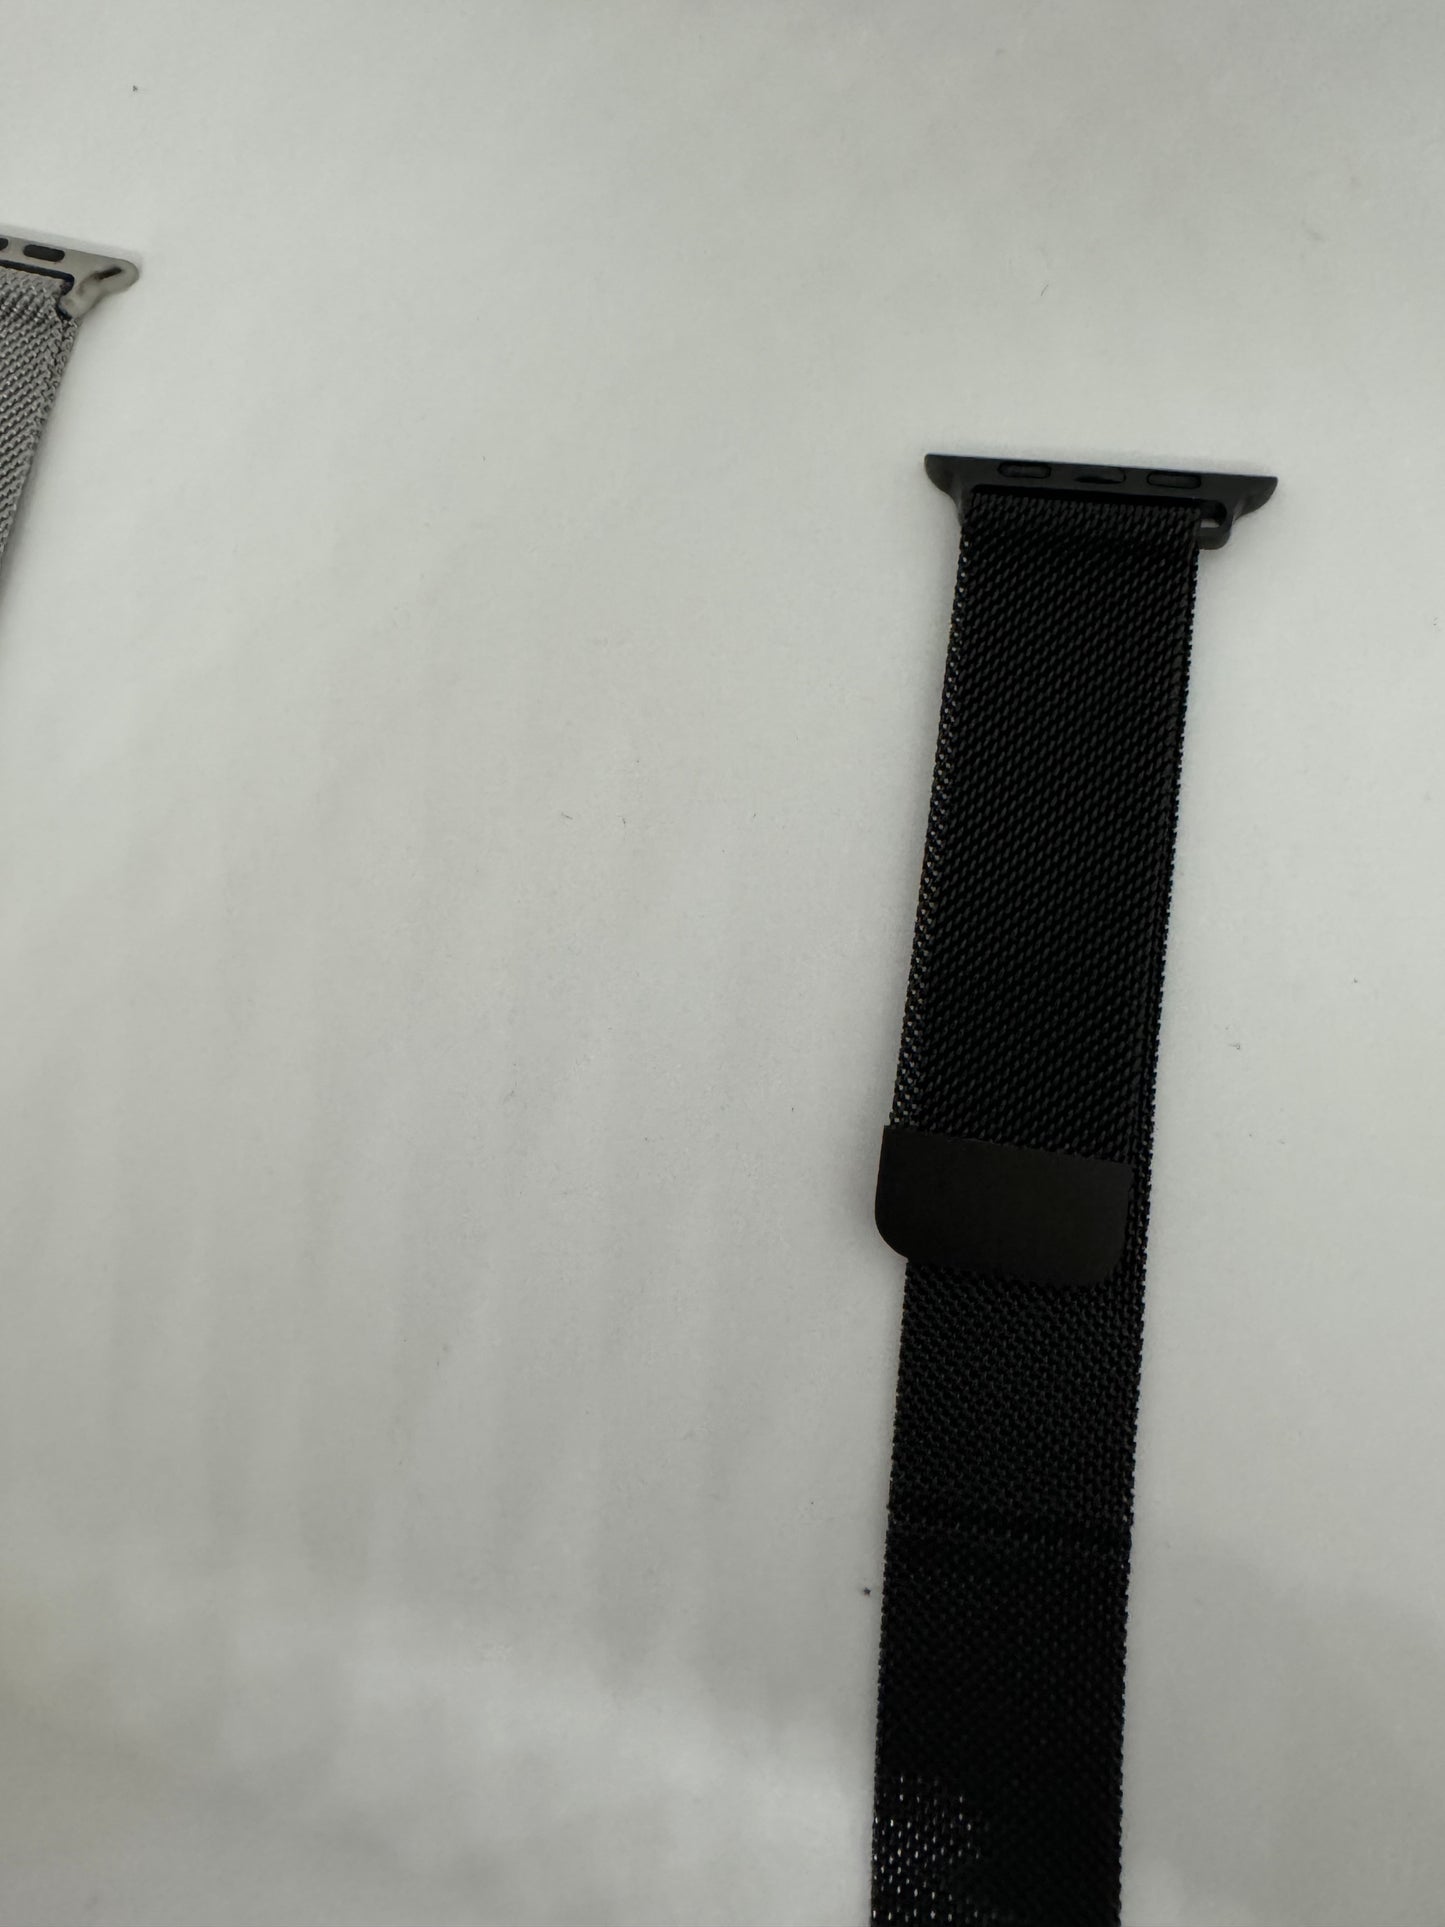 The picture shows two watch bands on a white background. On the left side, there is a small portion of a silver-colored watch band visible. On the right side, there is a black watch band with a dark grey attachment piece at the top. The black band appears to be made of a woven material and has a small black loop near the top. The background is plain white.